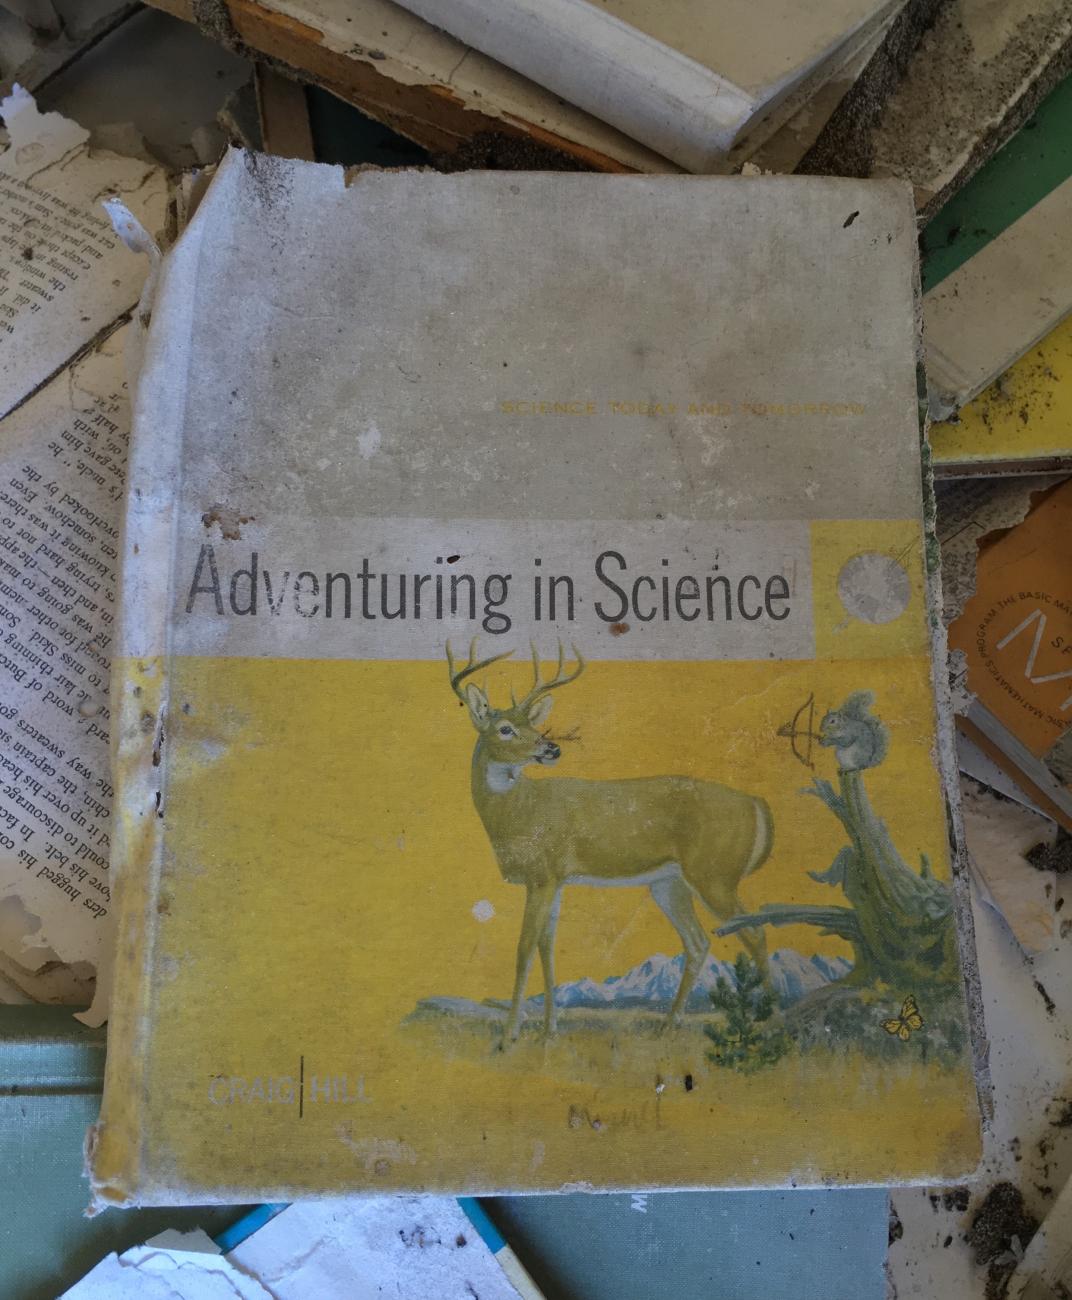 Tattered book titled "Adventuring in Science" with illustration of a squirrel pointing a bow and arrow at a deer